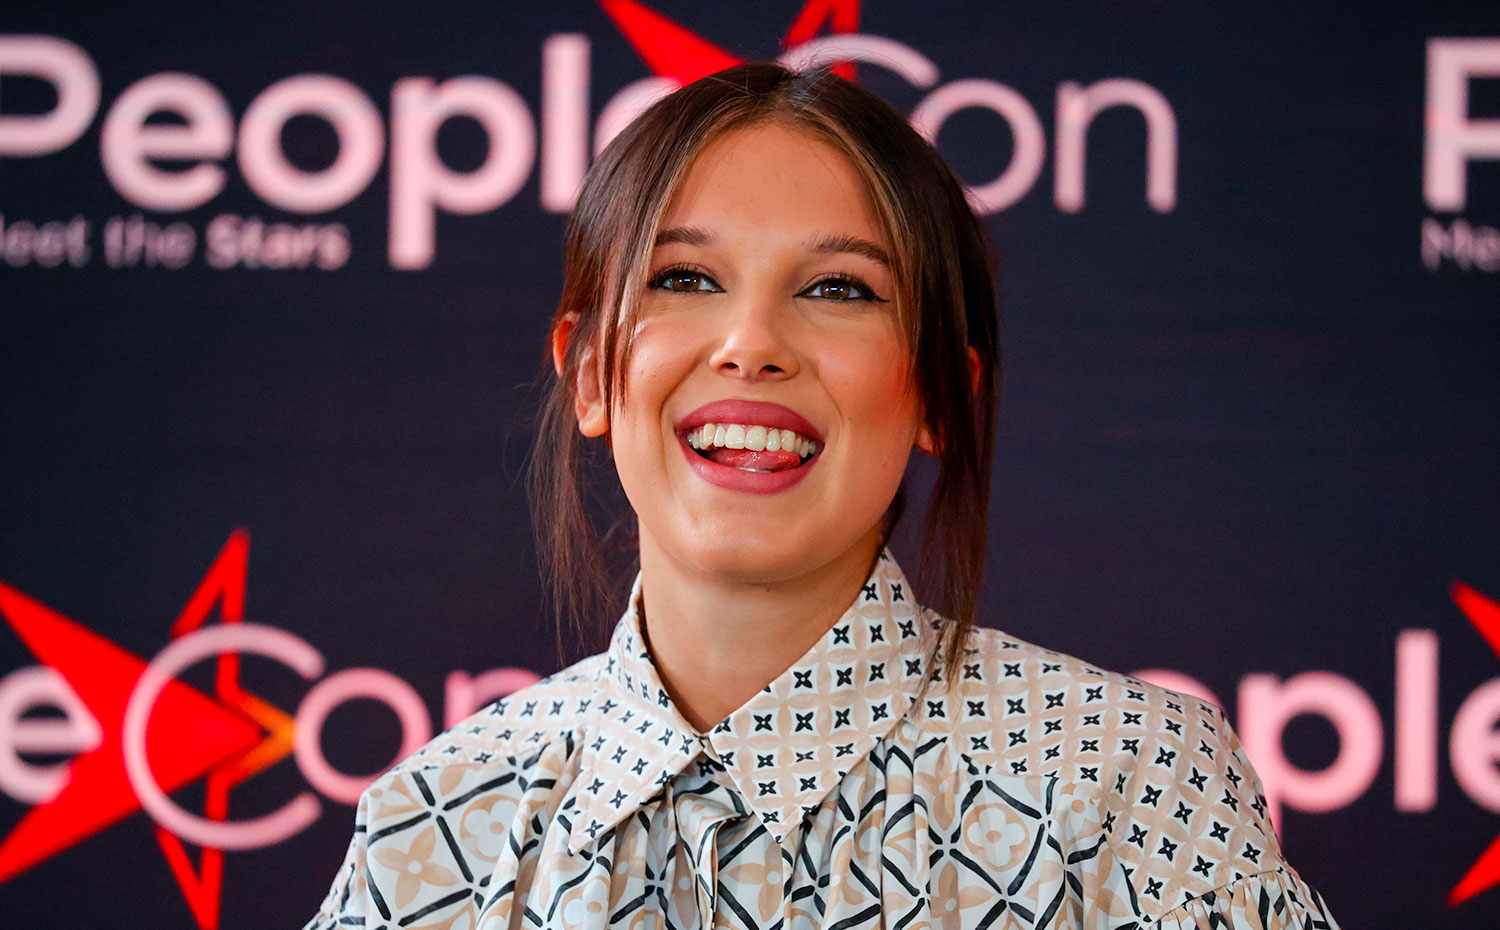 MillieBobbyBrown answers 30 questions as quickly as possible